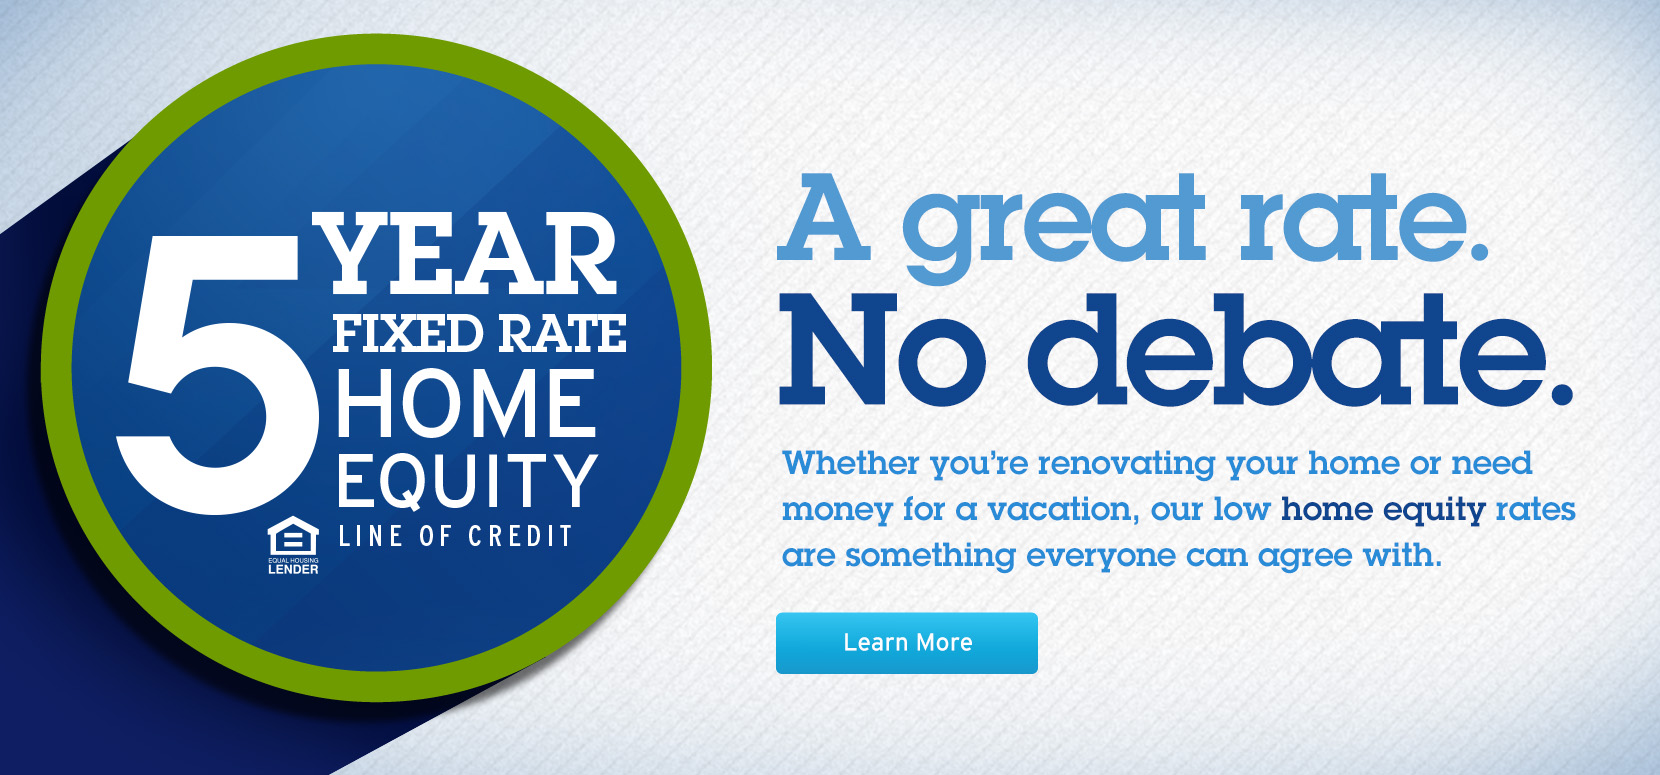 Learn more about our home equity line of credit.